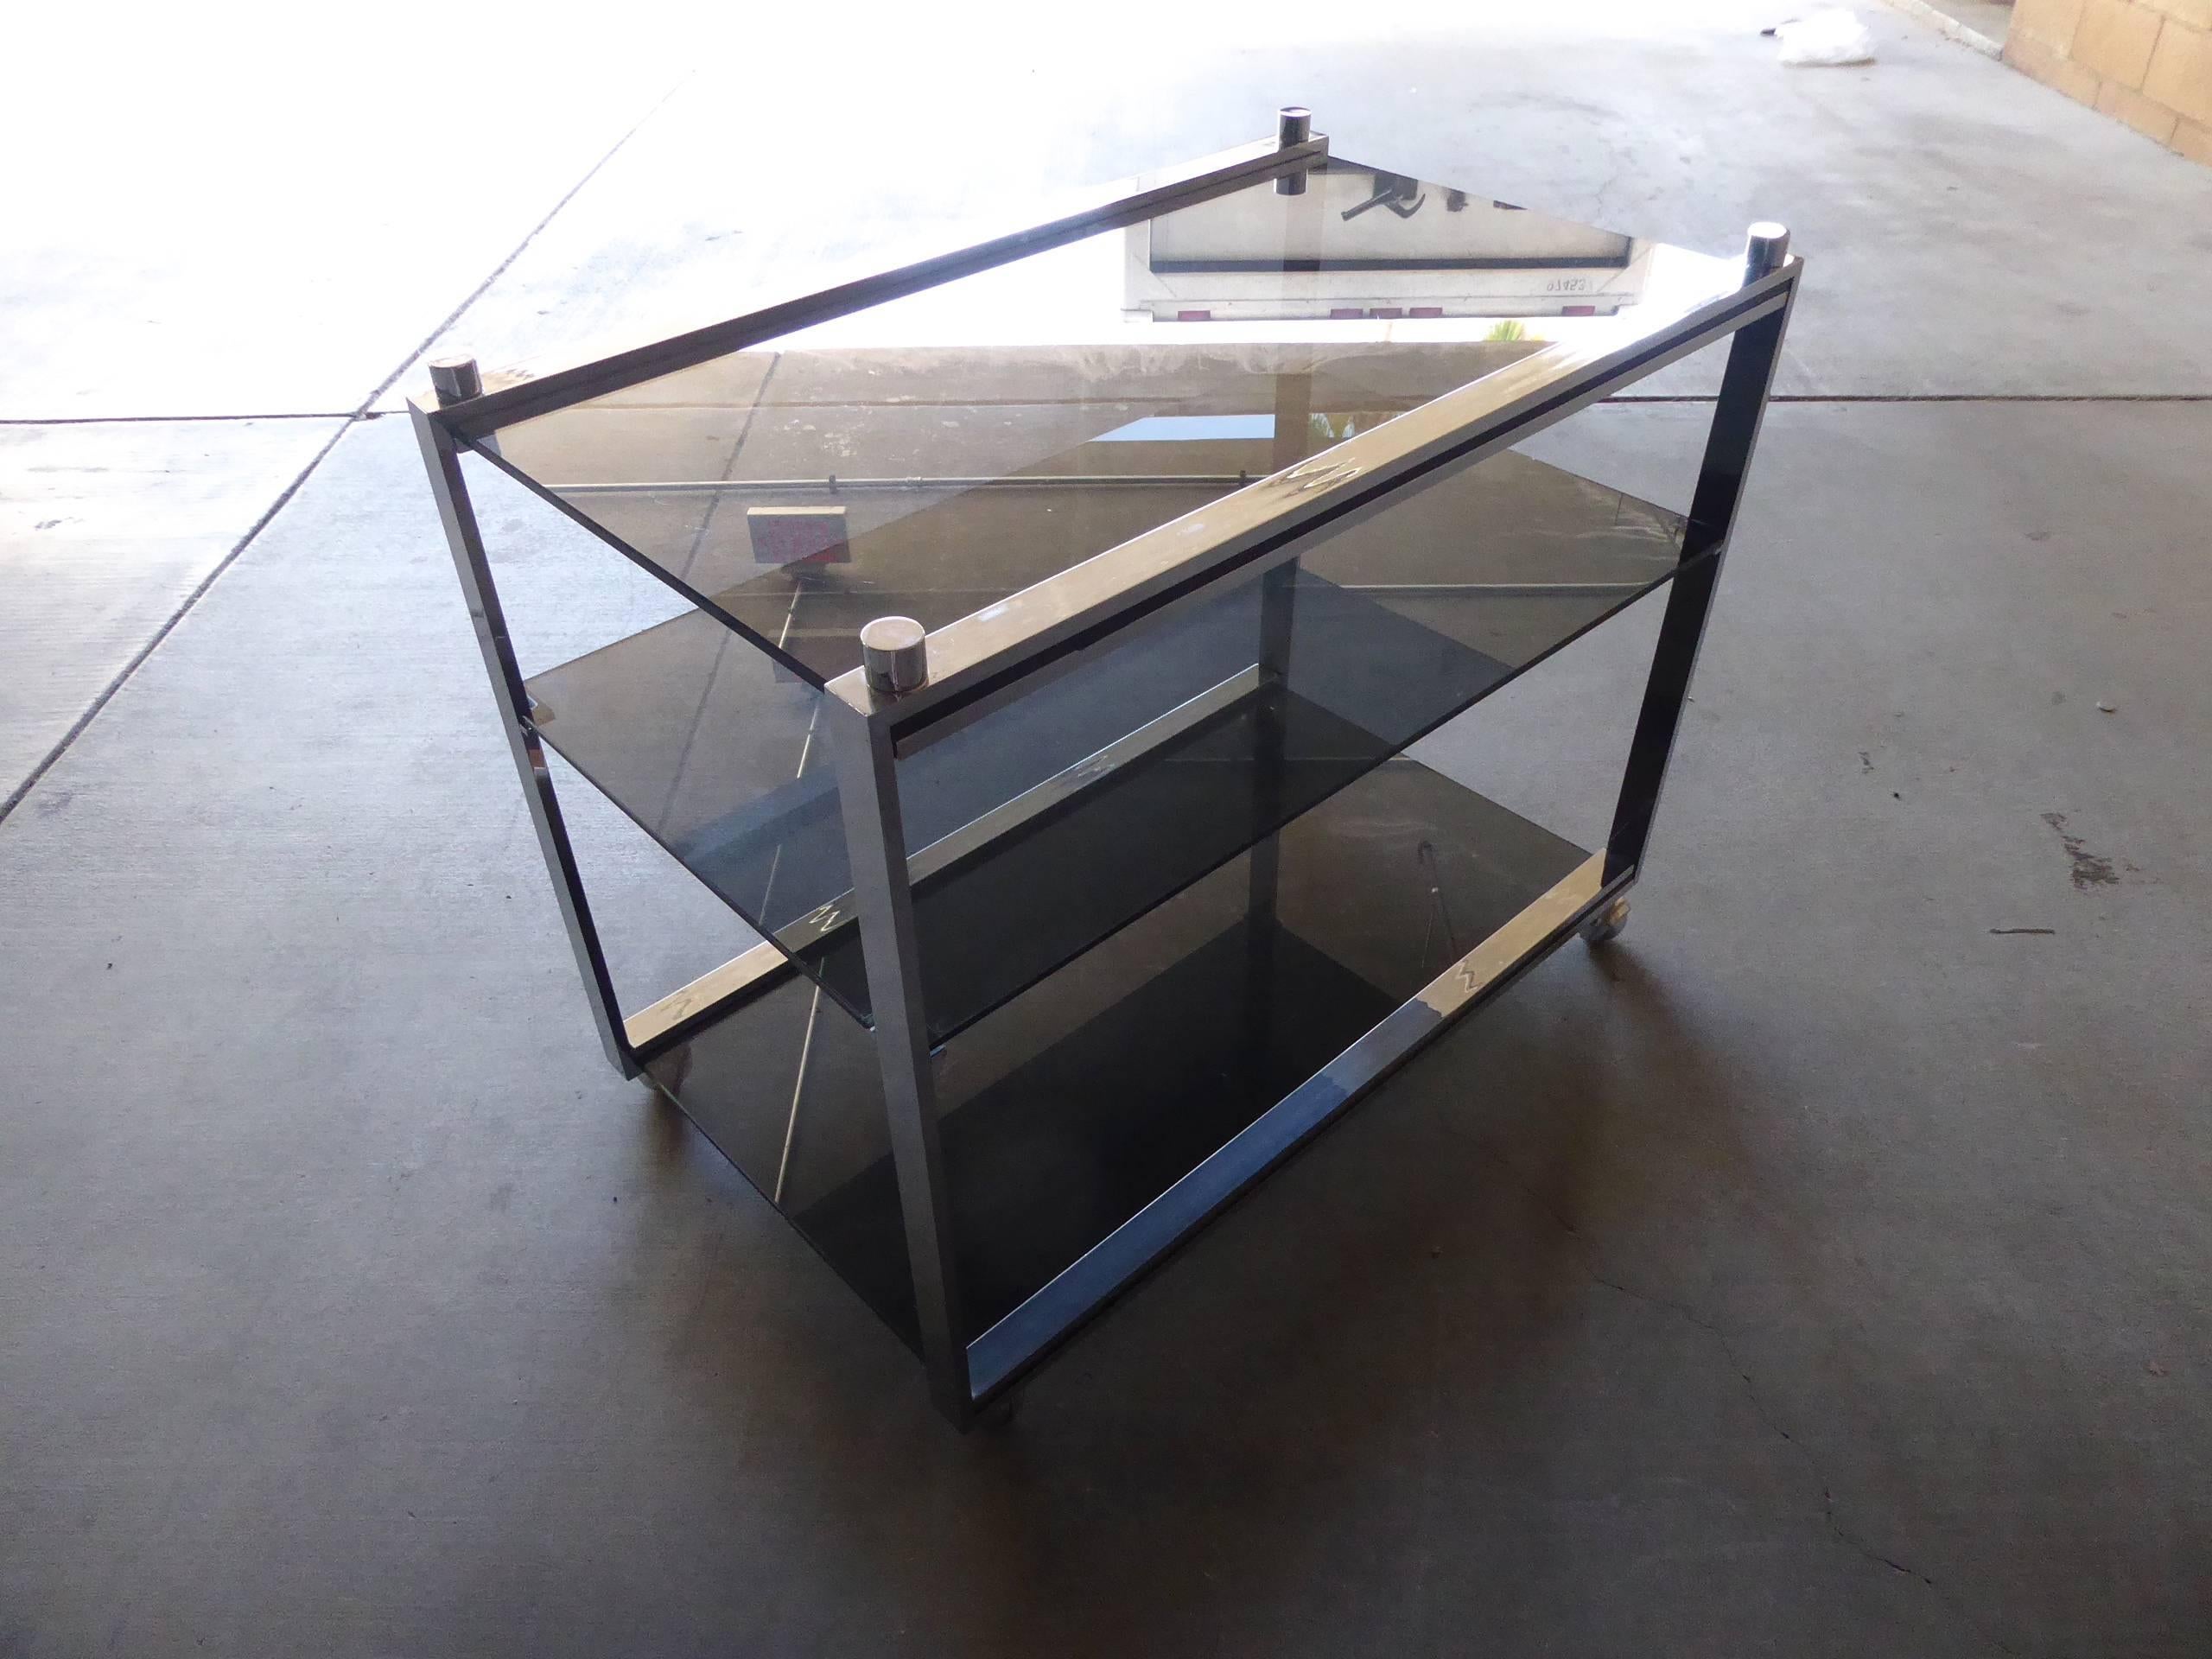 A chrome-plated steel and smoked glass three-tier rolling bar cart from the box line by Charles Hollis Jones. The cart was acquired from a home in Palm Desert, California and Mr. Jones has verified that it was made in 1968. It is completely original